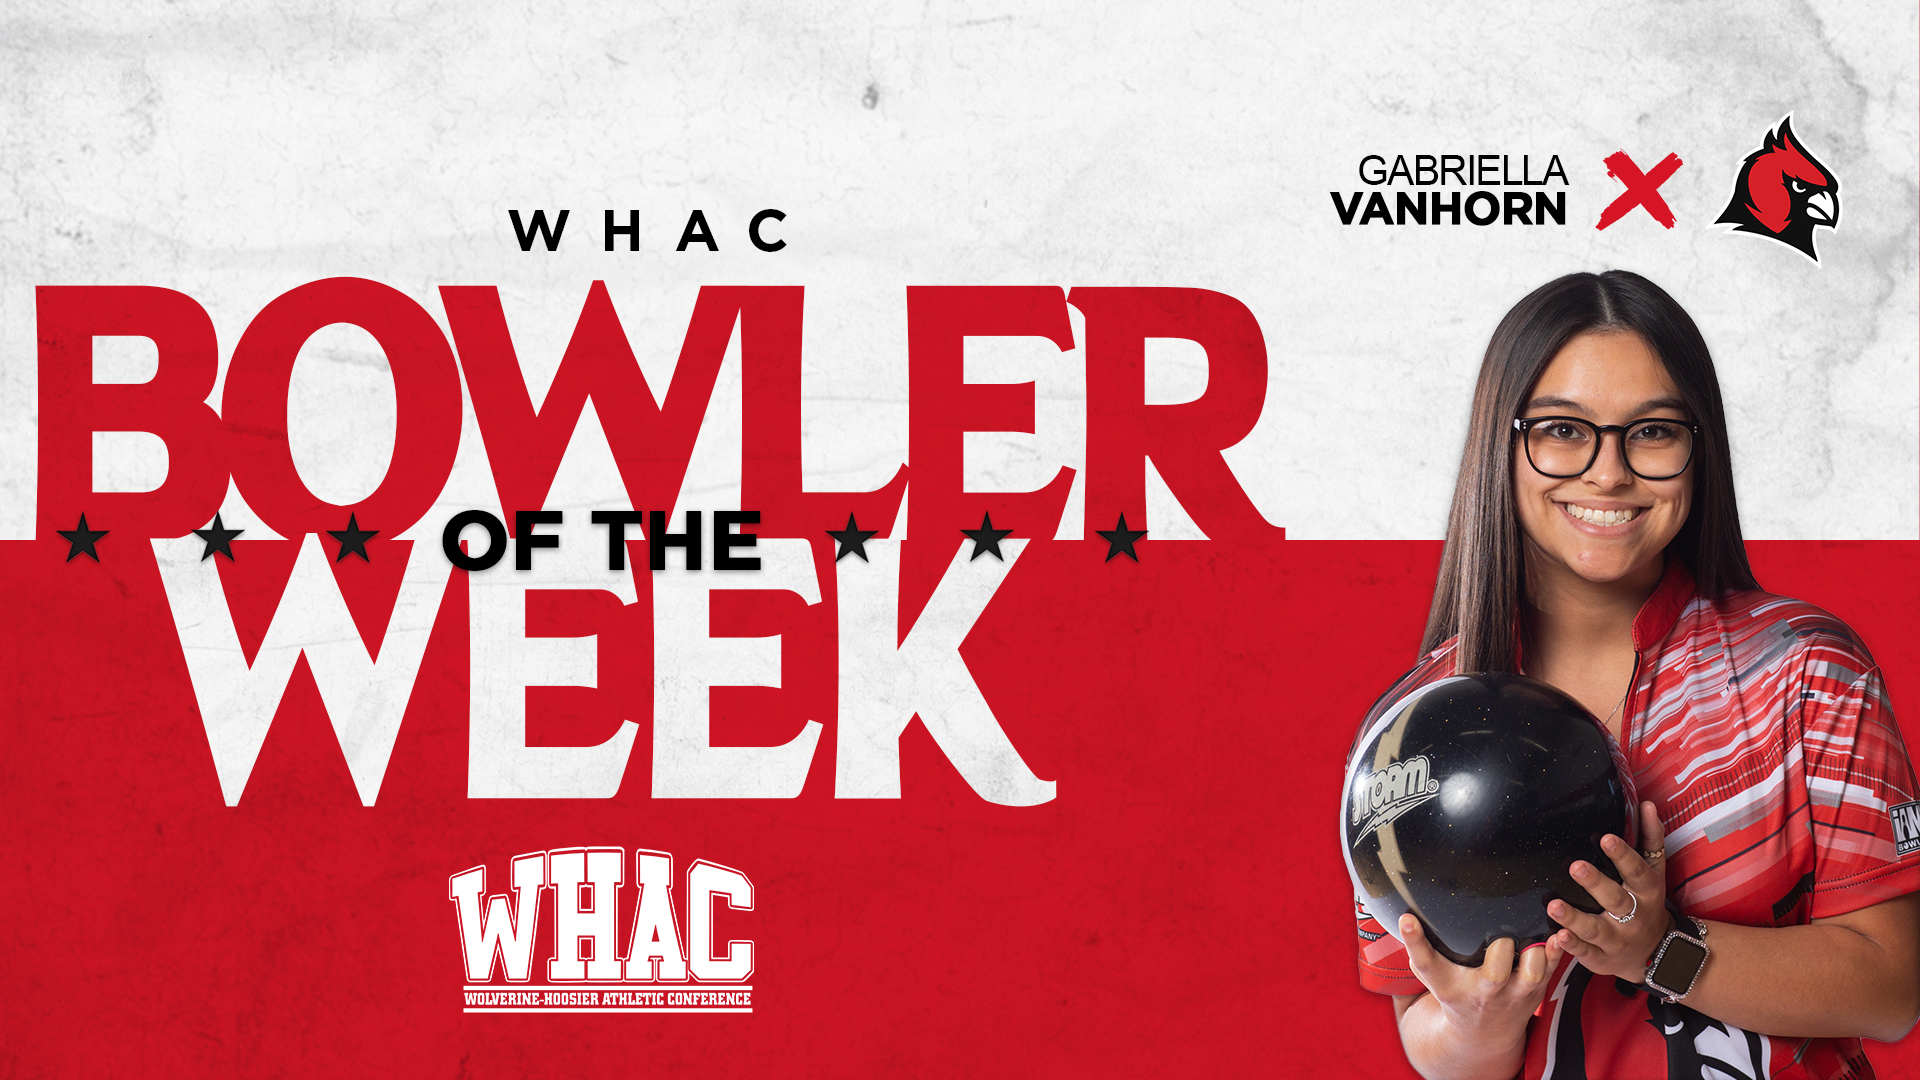 VanHorn named WHAC Bowler of the Week after setting program record